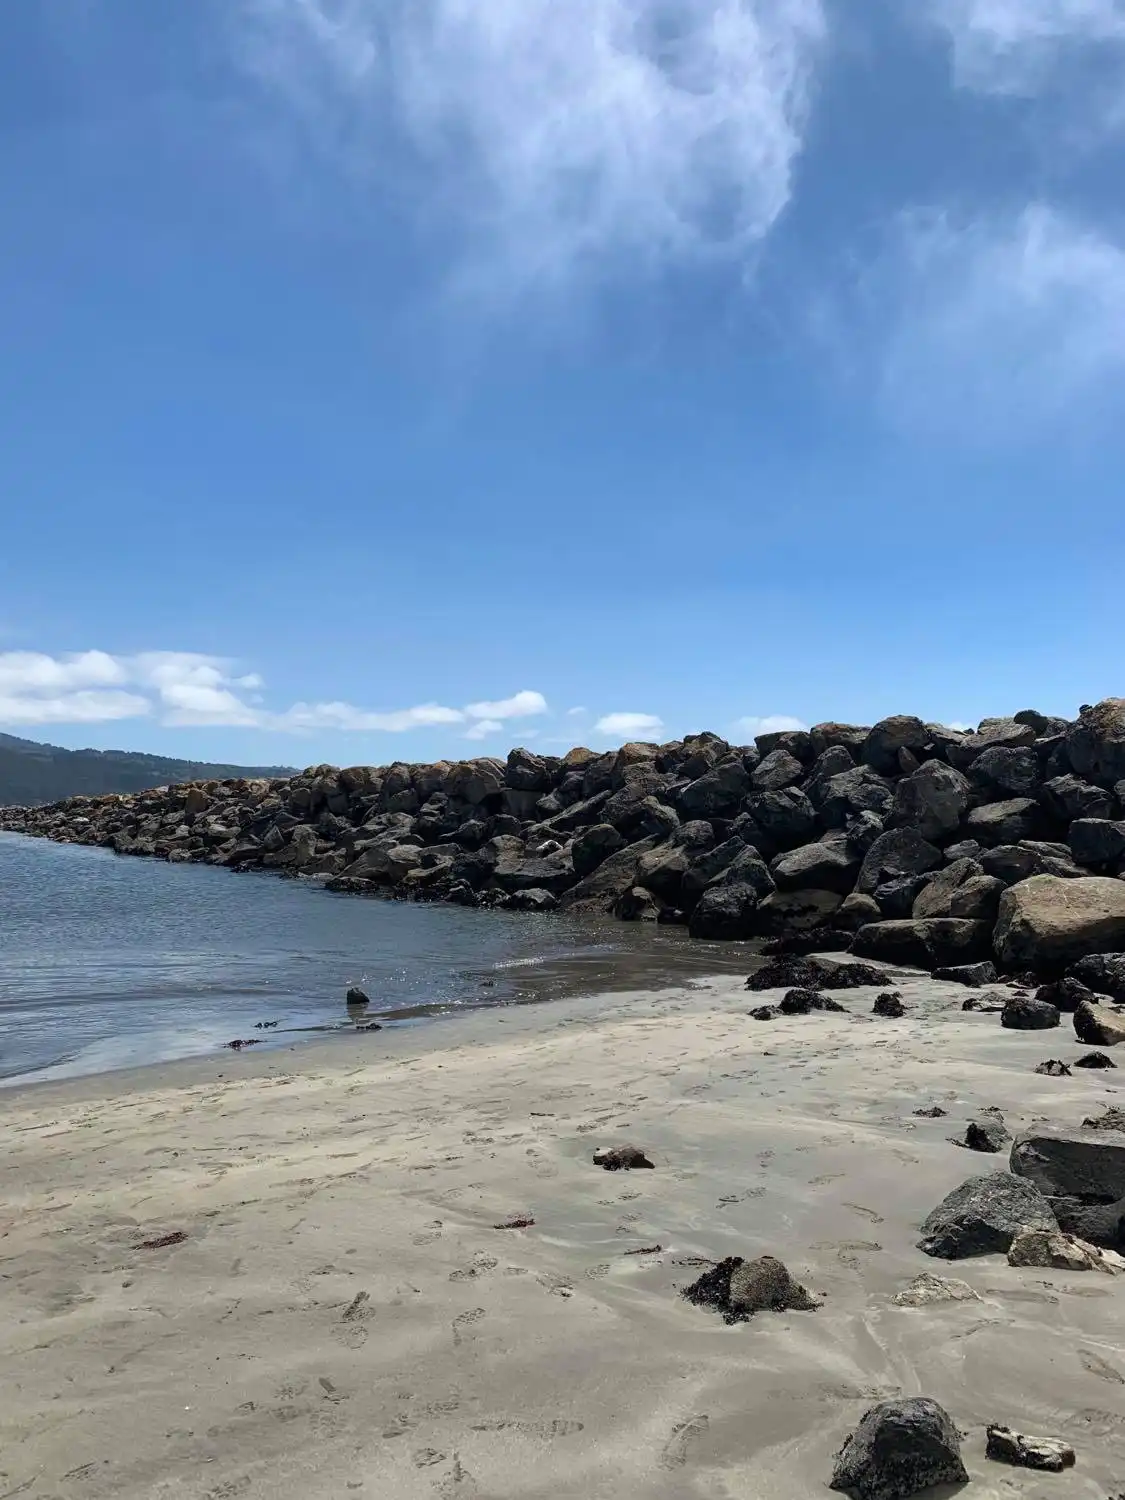 The north jetty at low tide